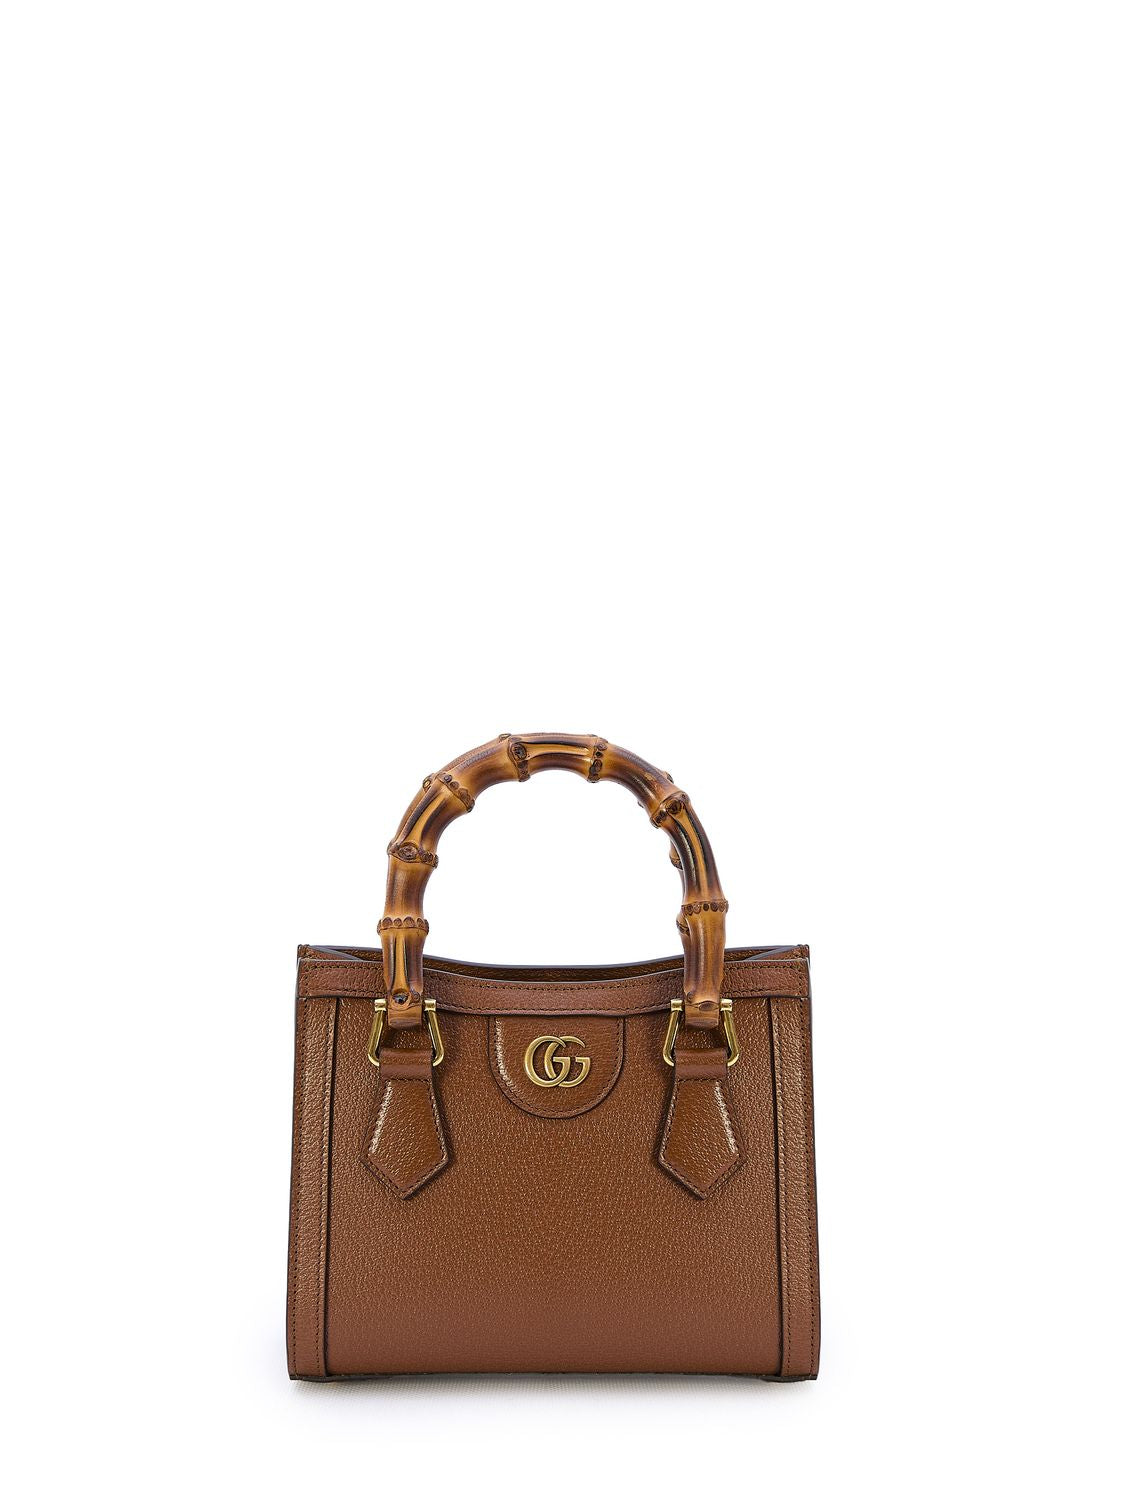 GUCCI Brown Leather Mini Handbag with Gold-Tone Double G, Bamboo Handles & Adjustable Strap, 20x16x10 cm